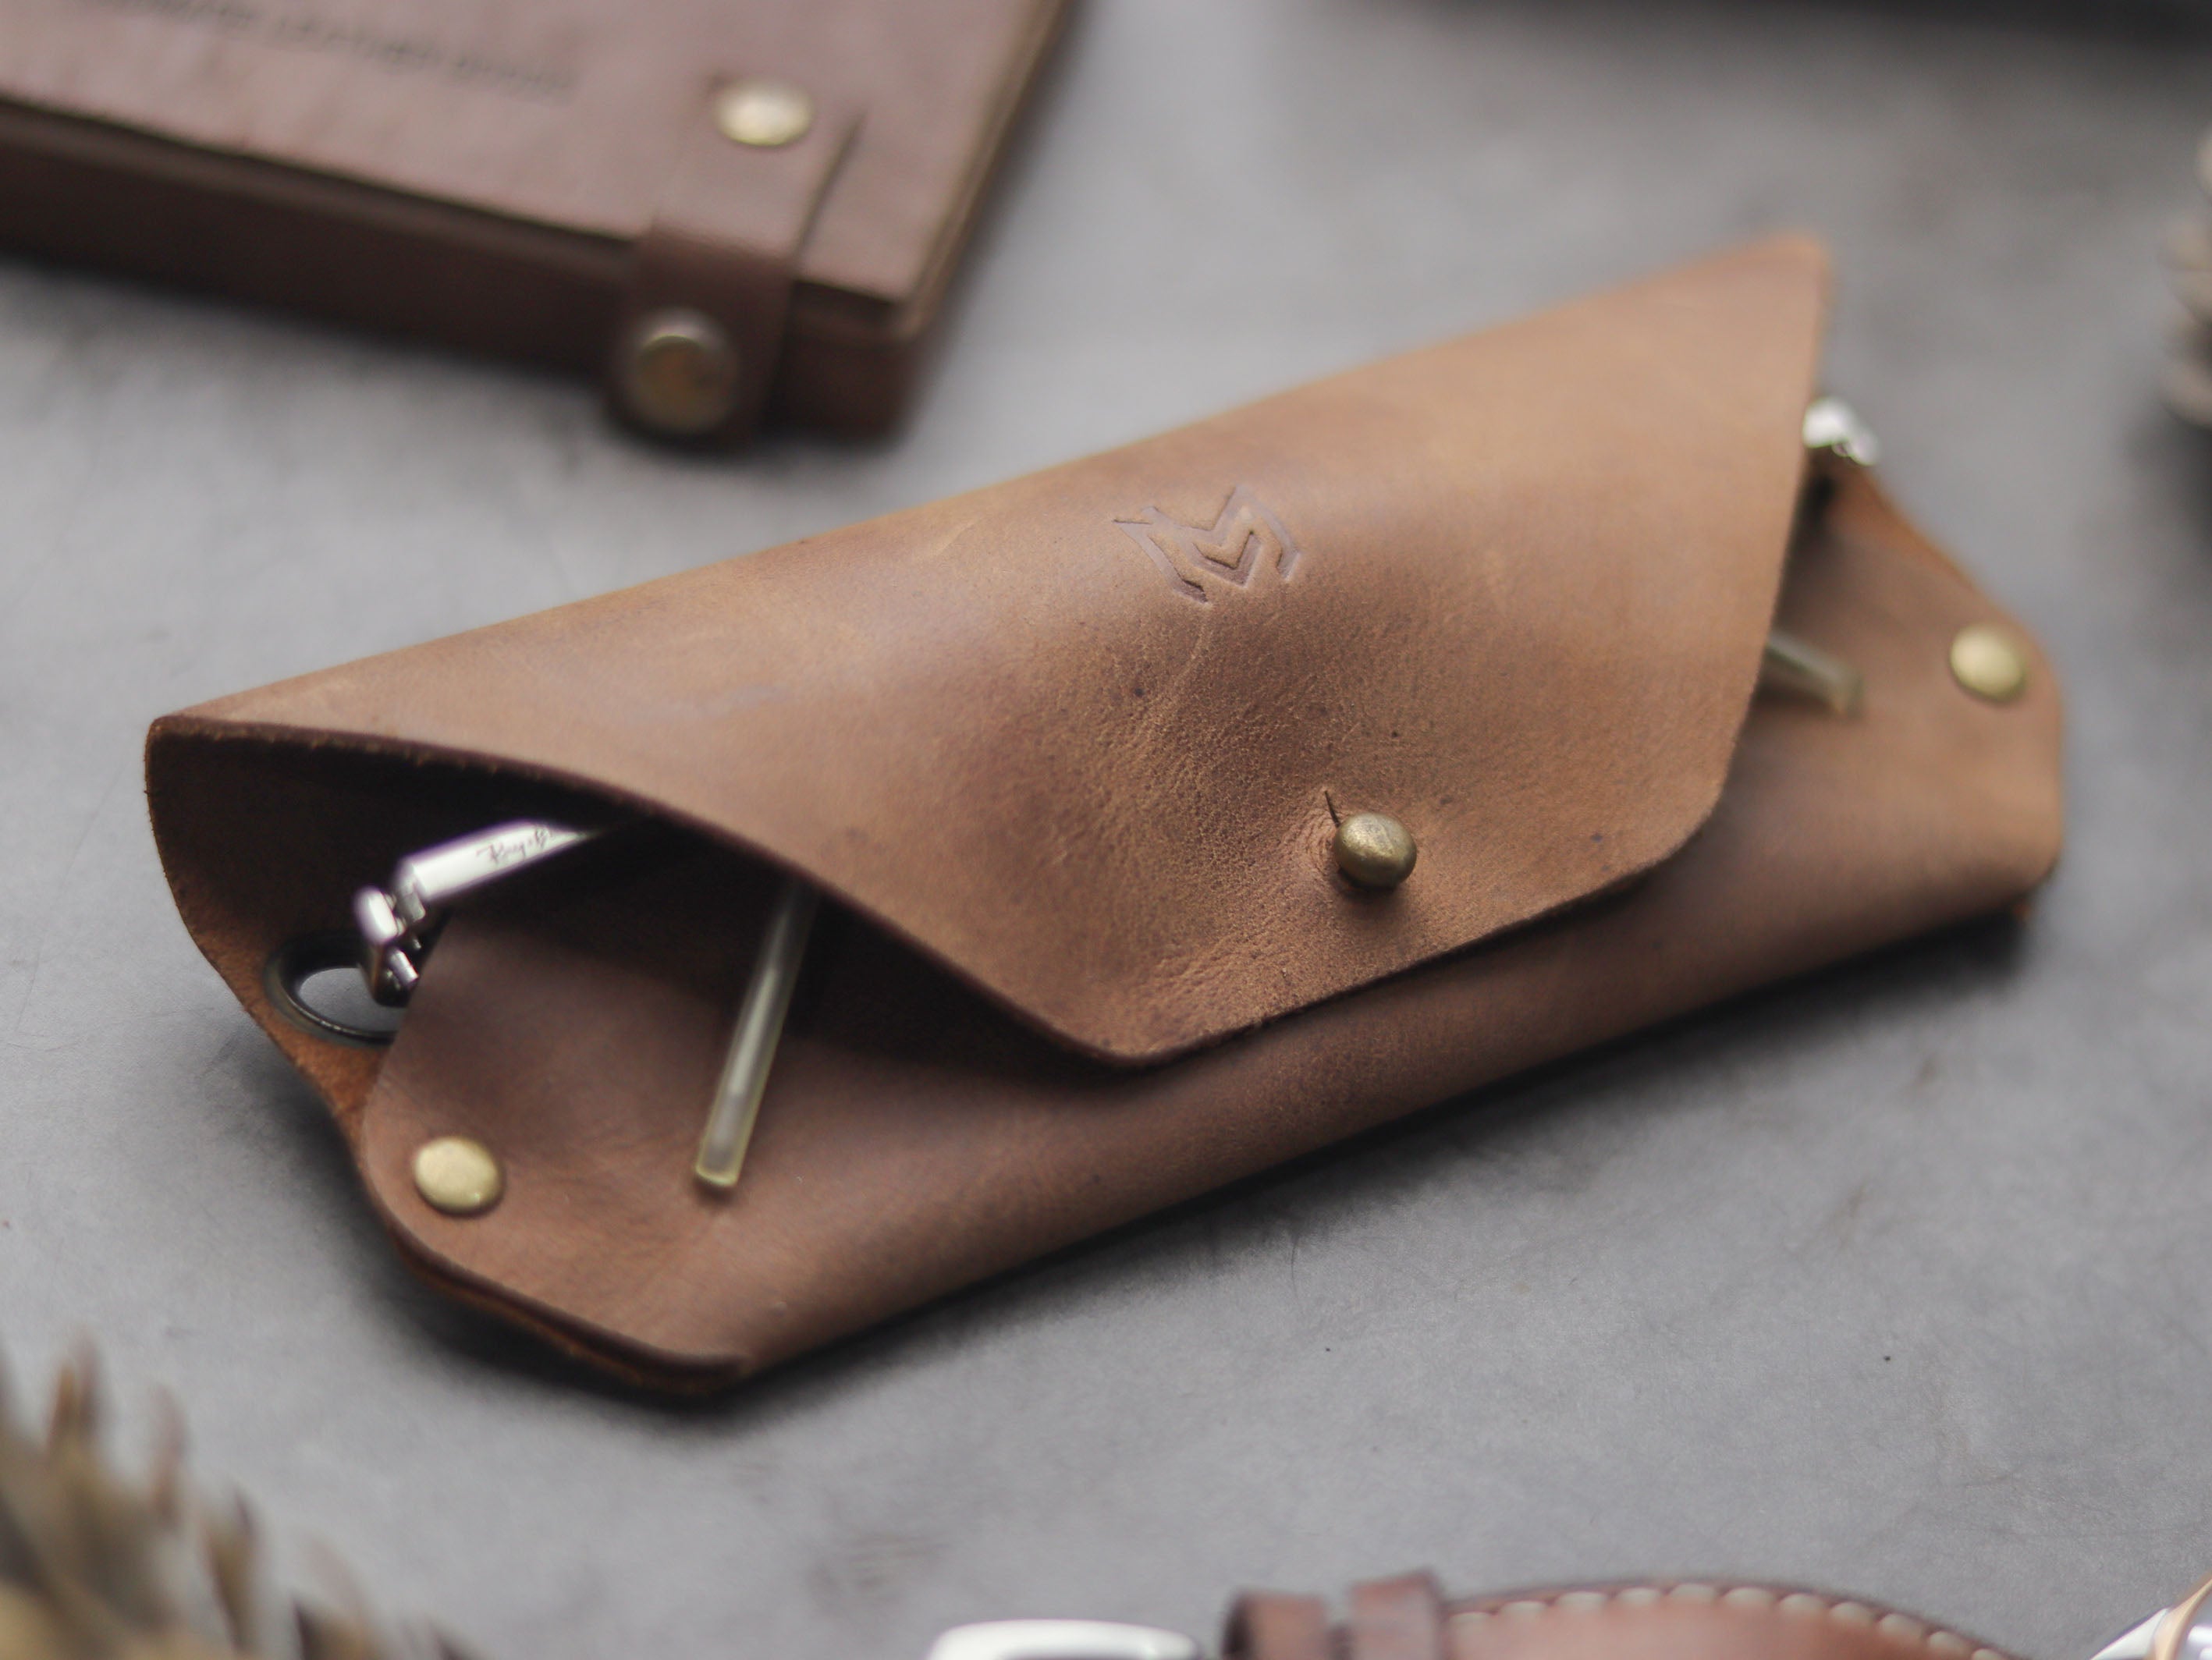 SG-1 SUNGLASSES CASE - RUSTY BROWN LEATHER